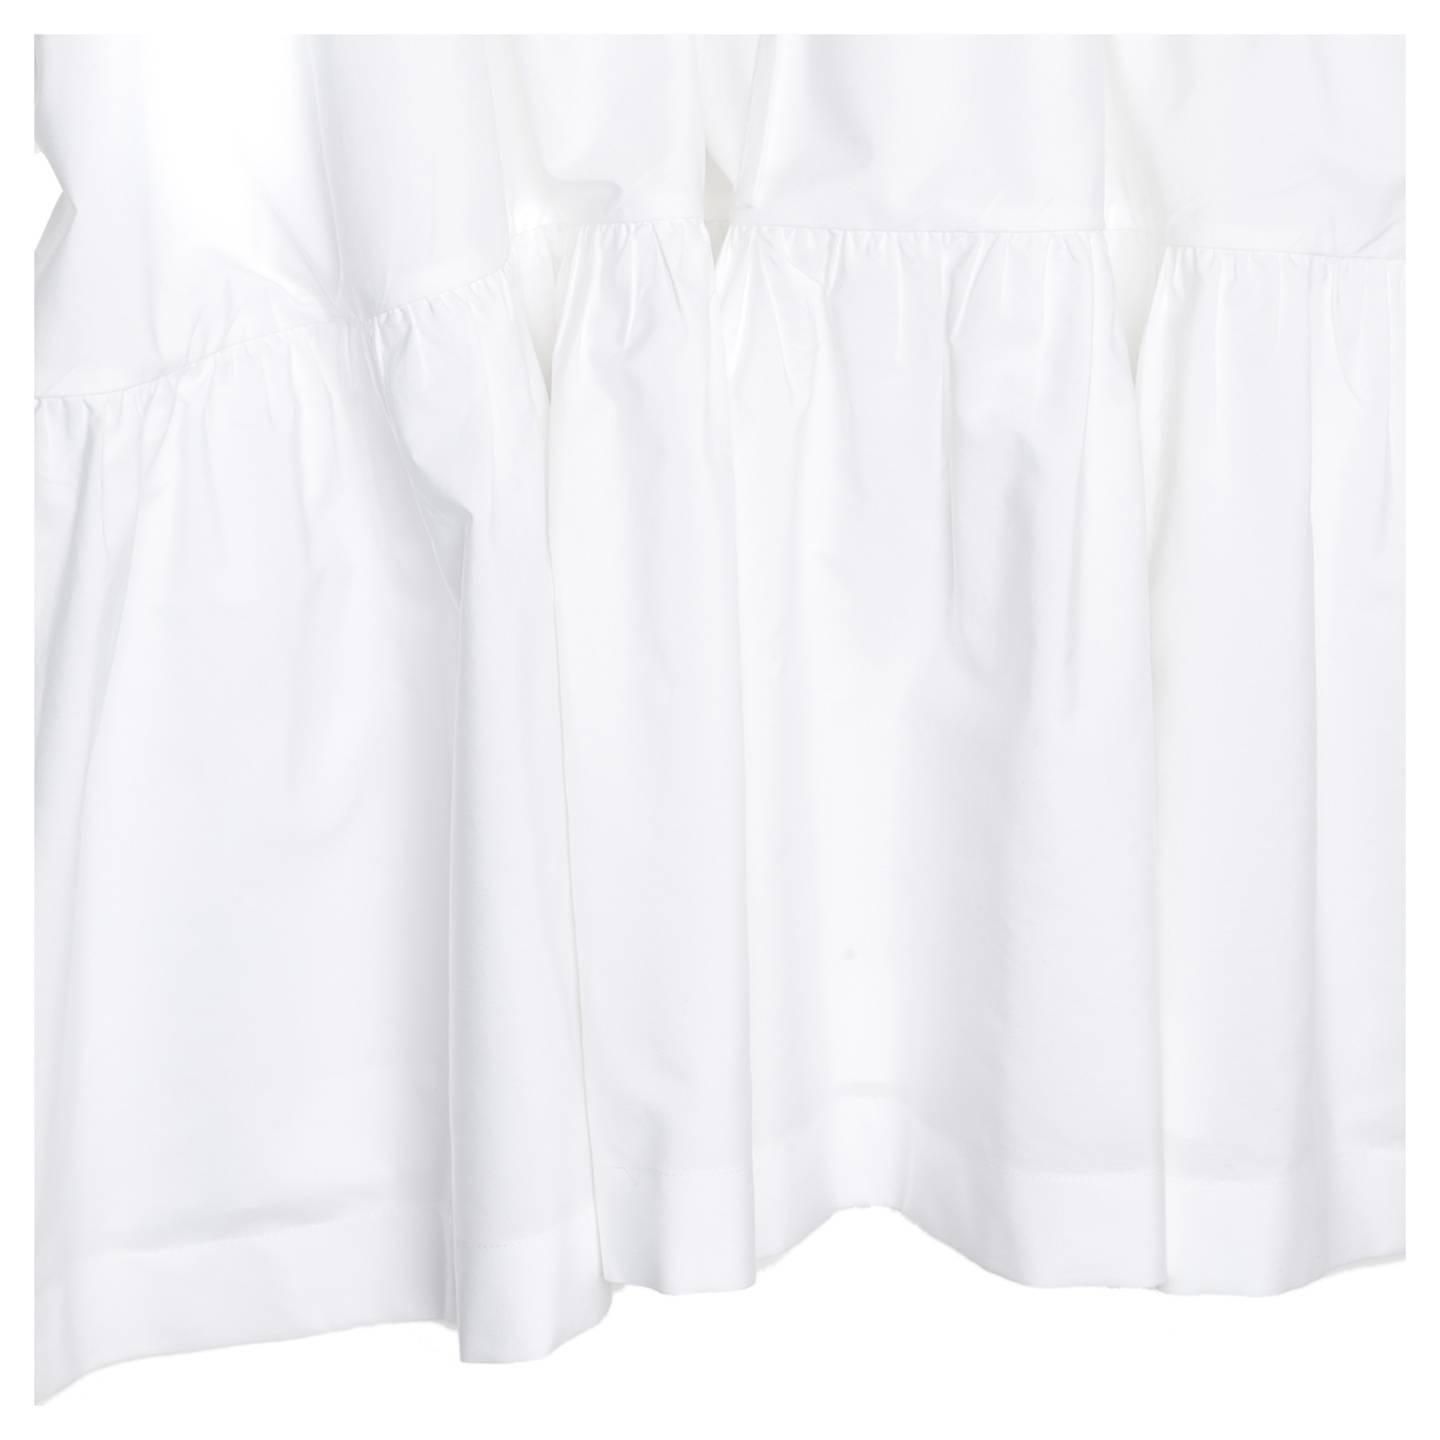 Chloe' White Cotton Dress In Excellent Condition For Sale In Brooklyn, NY